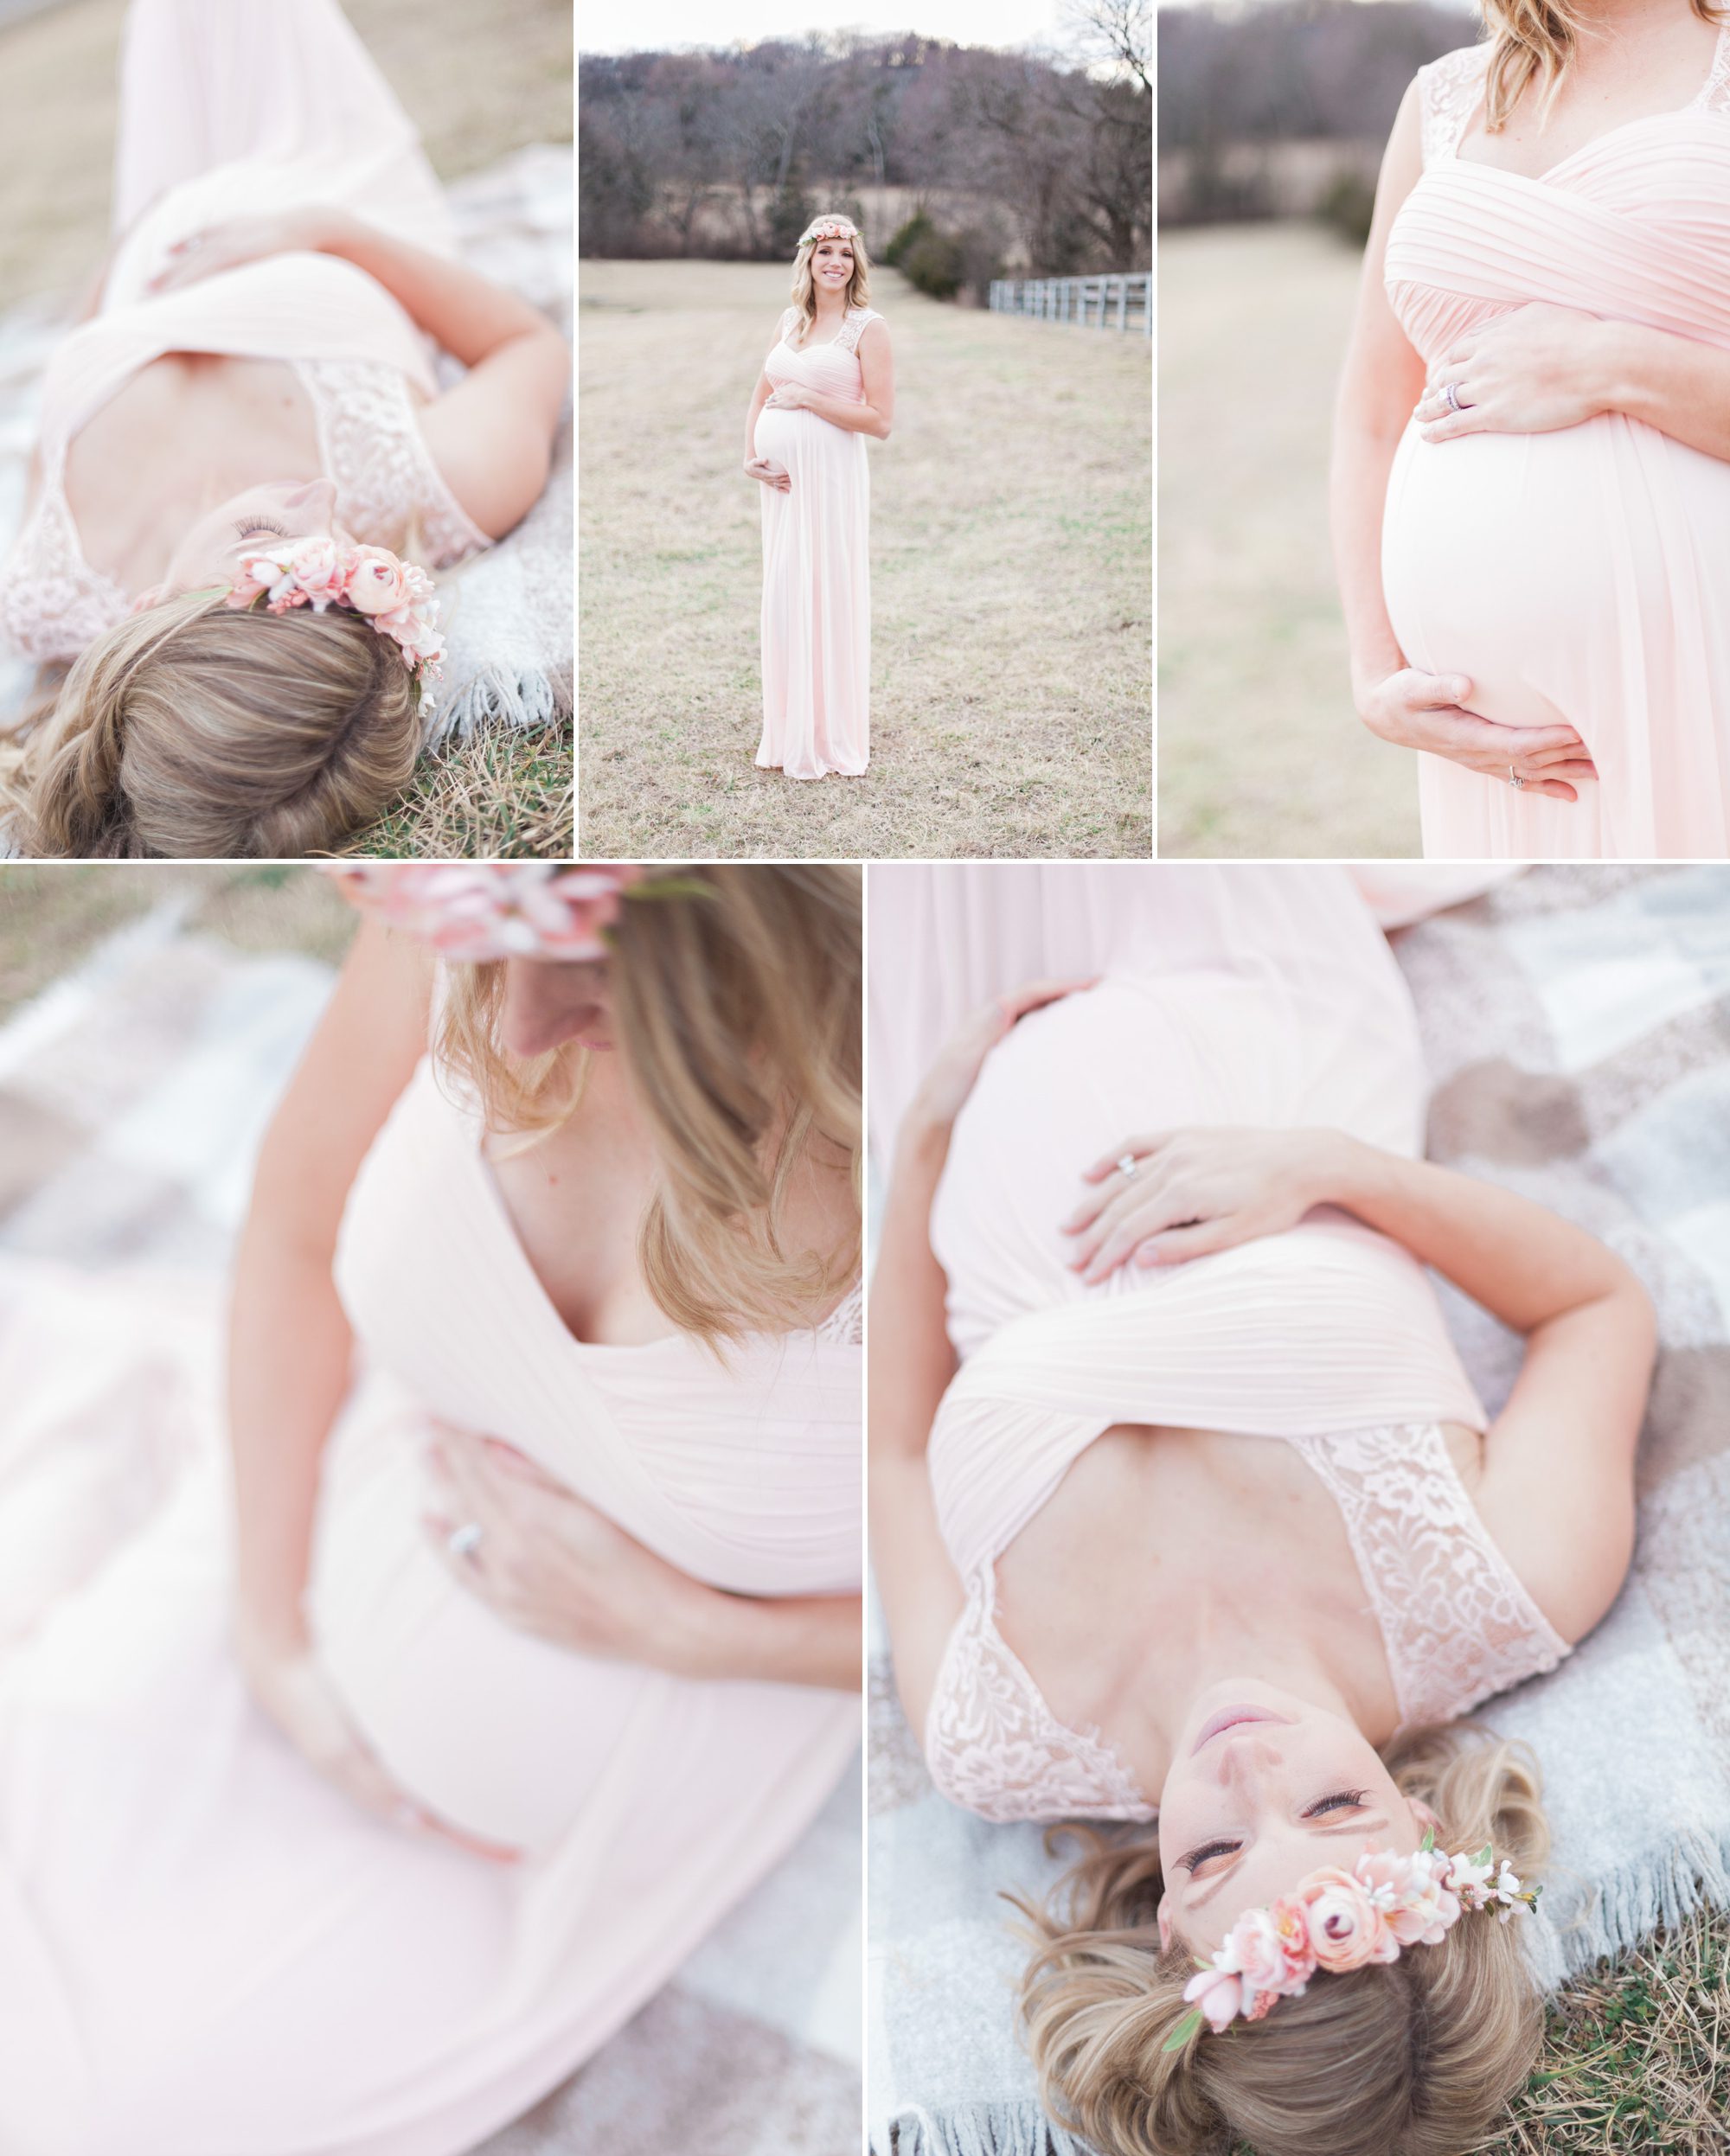 Expecting mom with maternity dress and flower crown. Winter Family Maternity Photo Session in Brentwood, TN. Photo by Krista Lee Photography Nashville TN